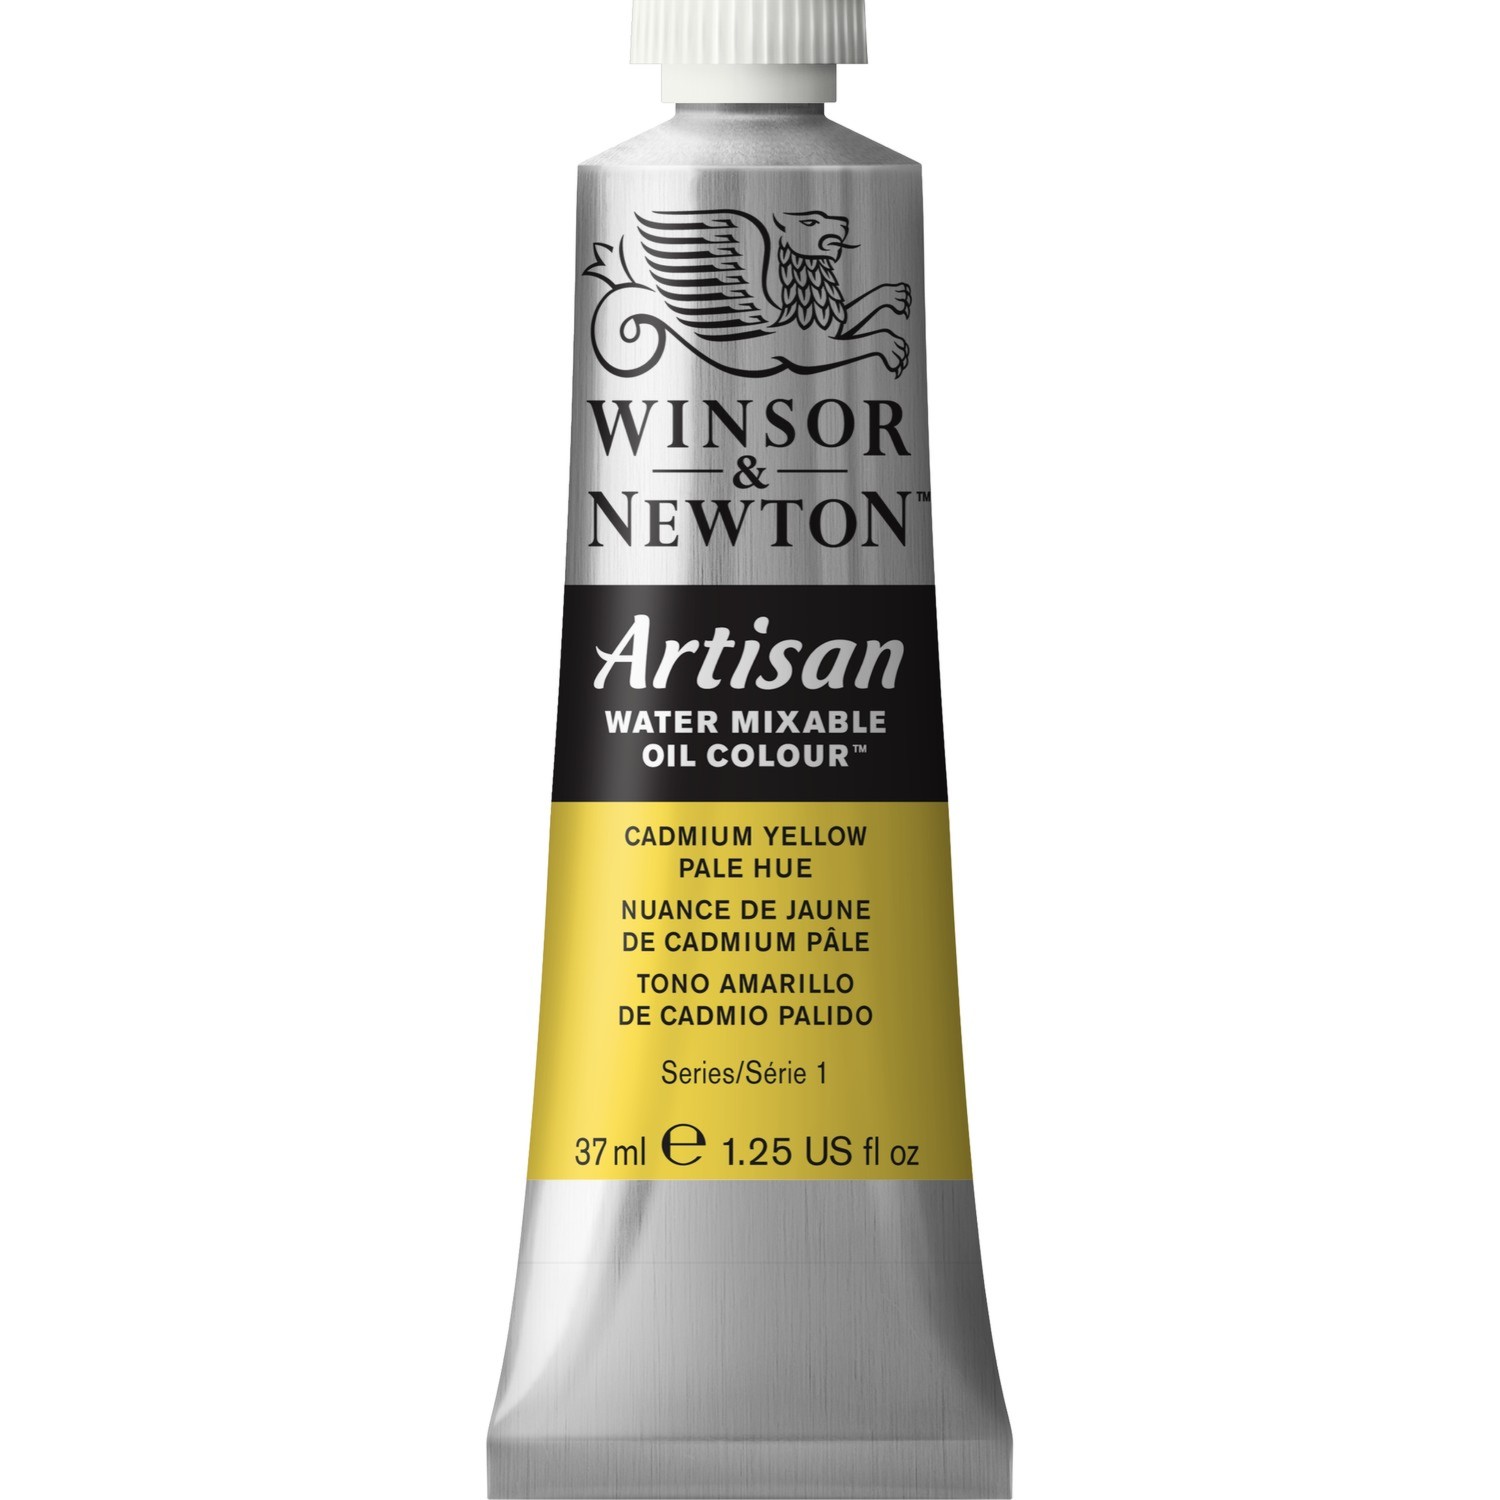 Winsor and Newton 37ml Artisan Mixable Oil Paint - Cadmium Pale Yellow Hue Image 1